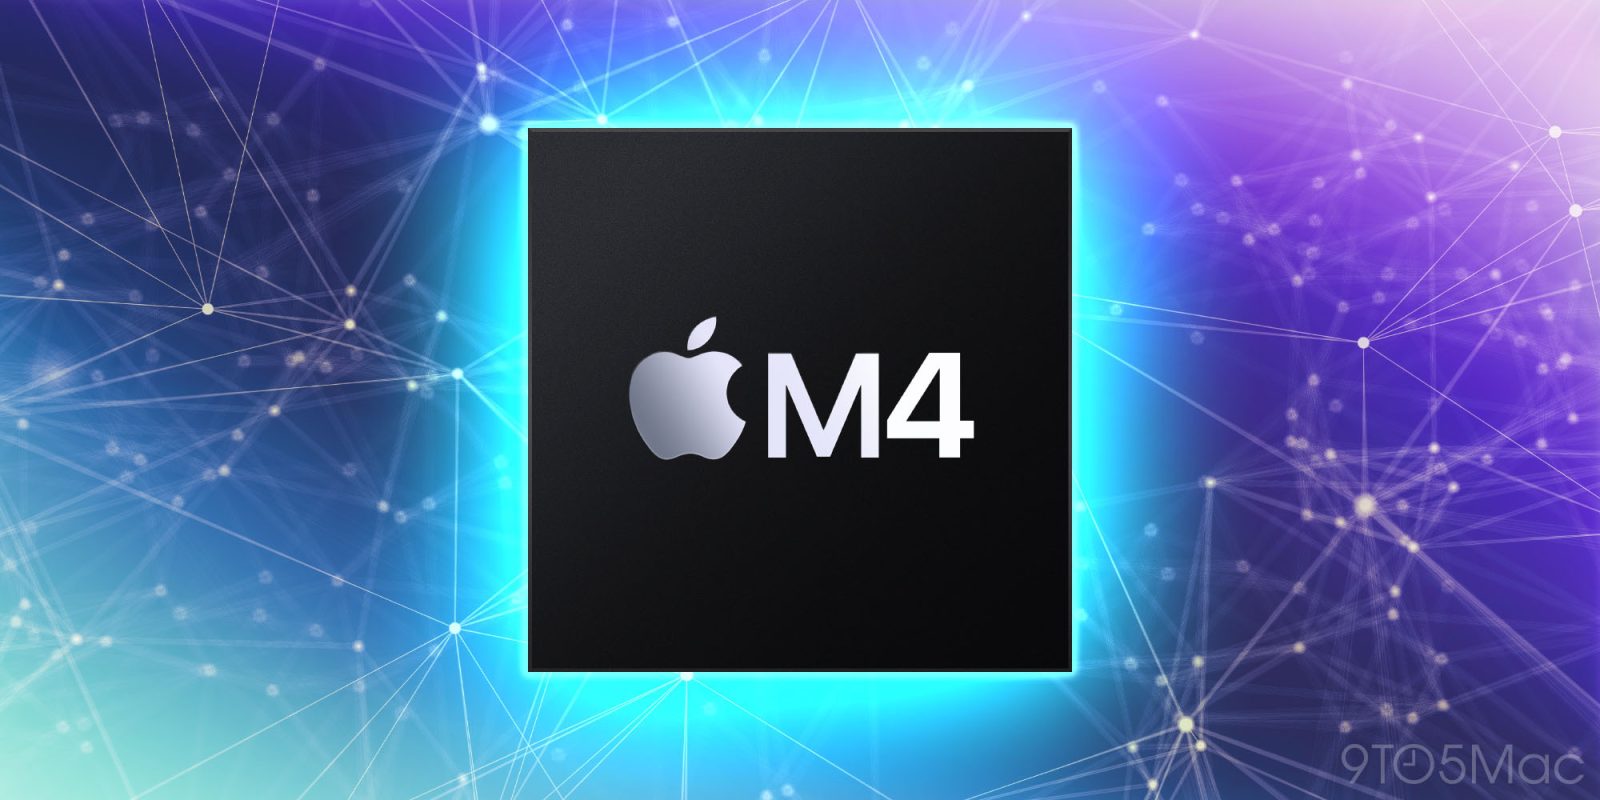 Apple aiming to release first M4-powered Macs this year with a focus on AI &#8211; 9to5Mac